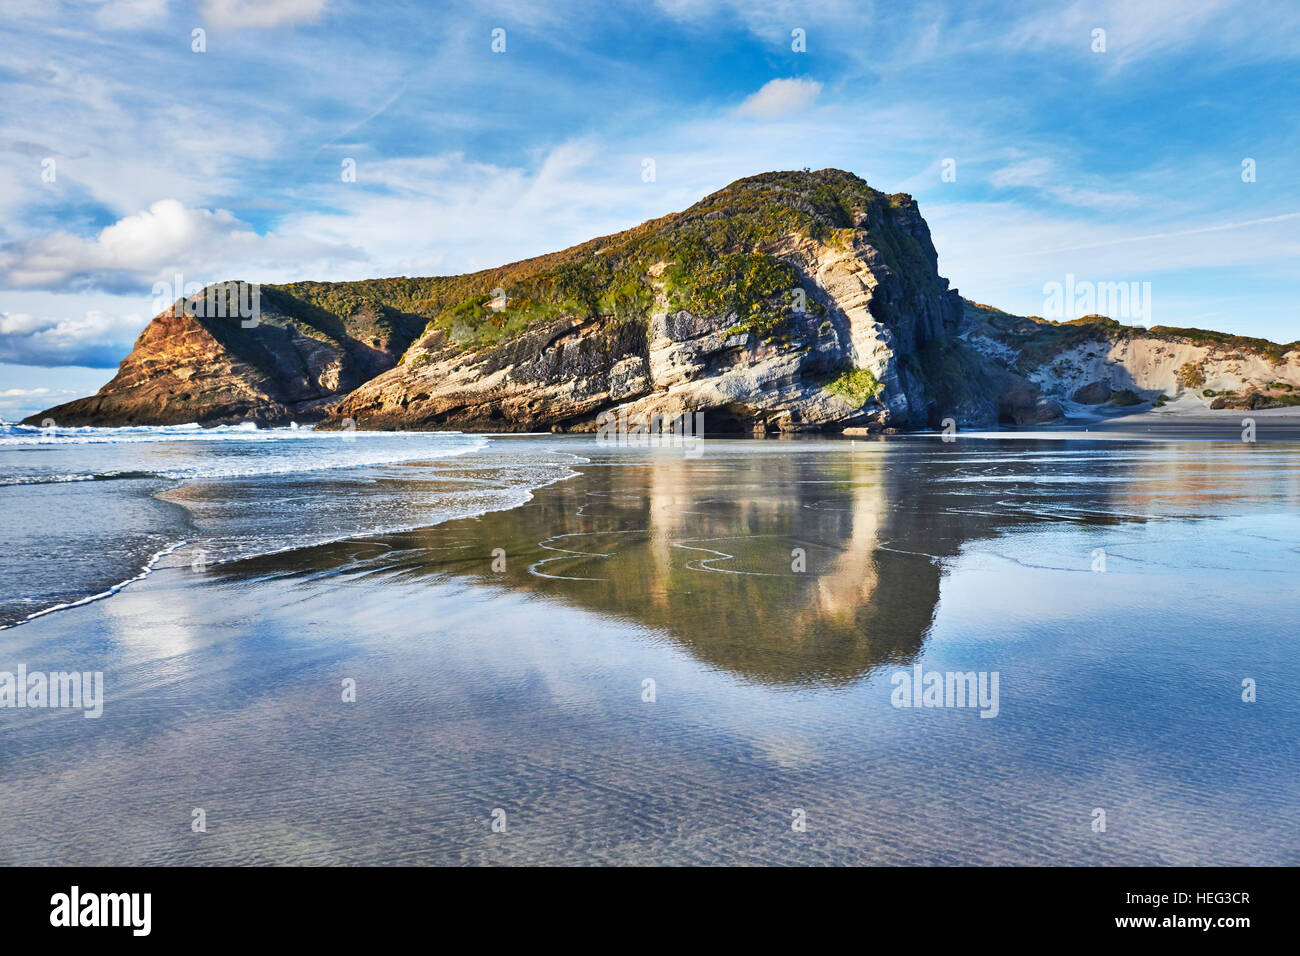 New Zealand, Puponga, Wharariki, rock formations on the beach, reflections in wet Sand Stock Photo